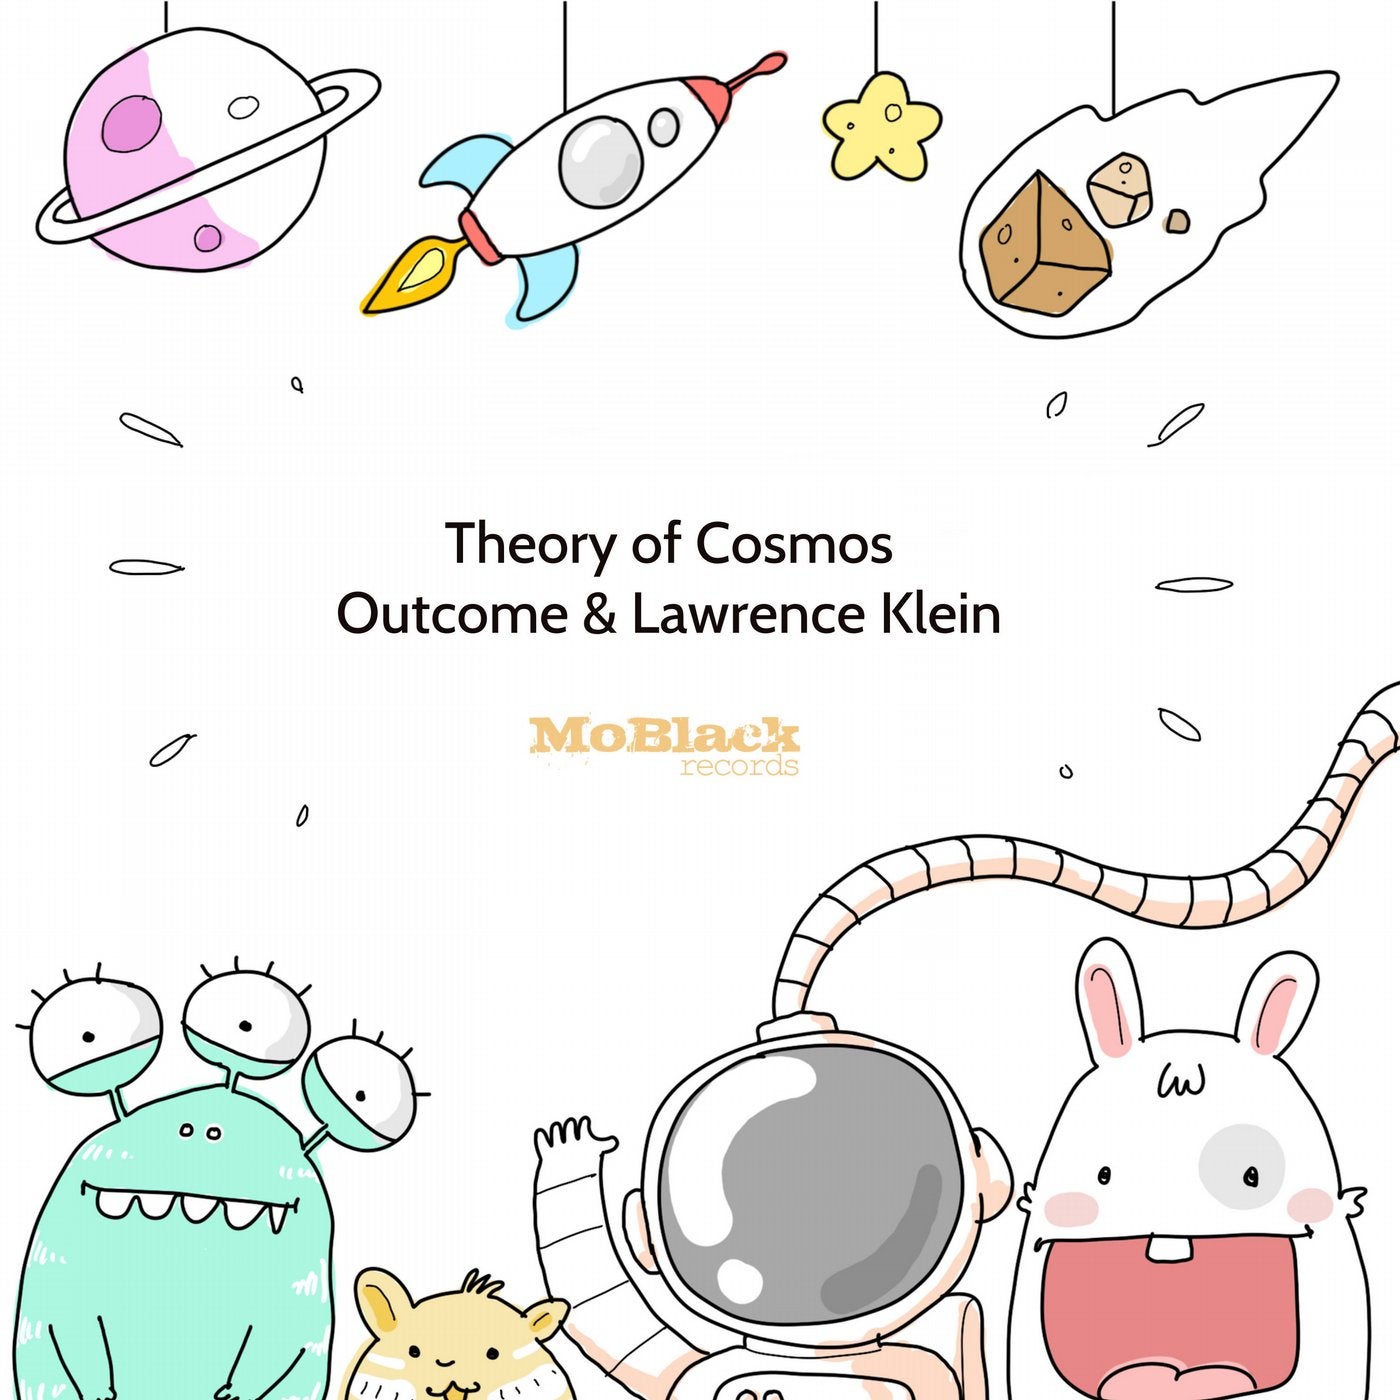 Theory of Cosmos